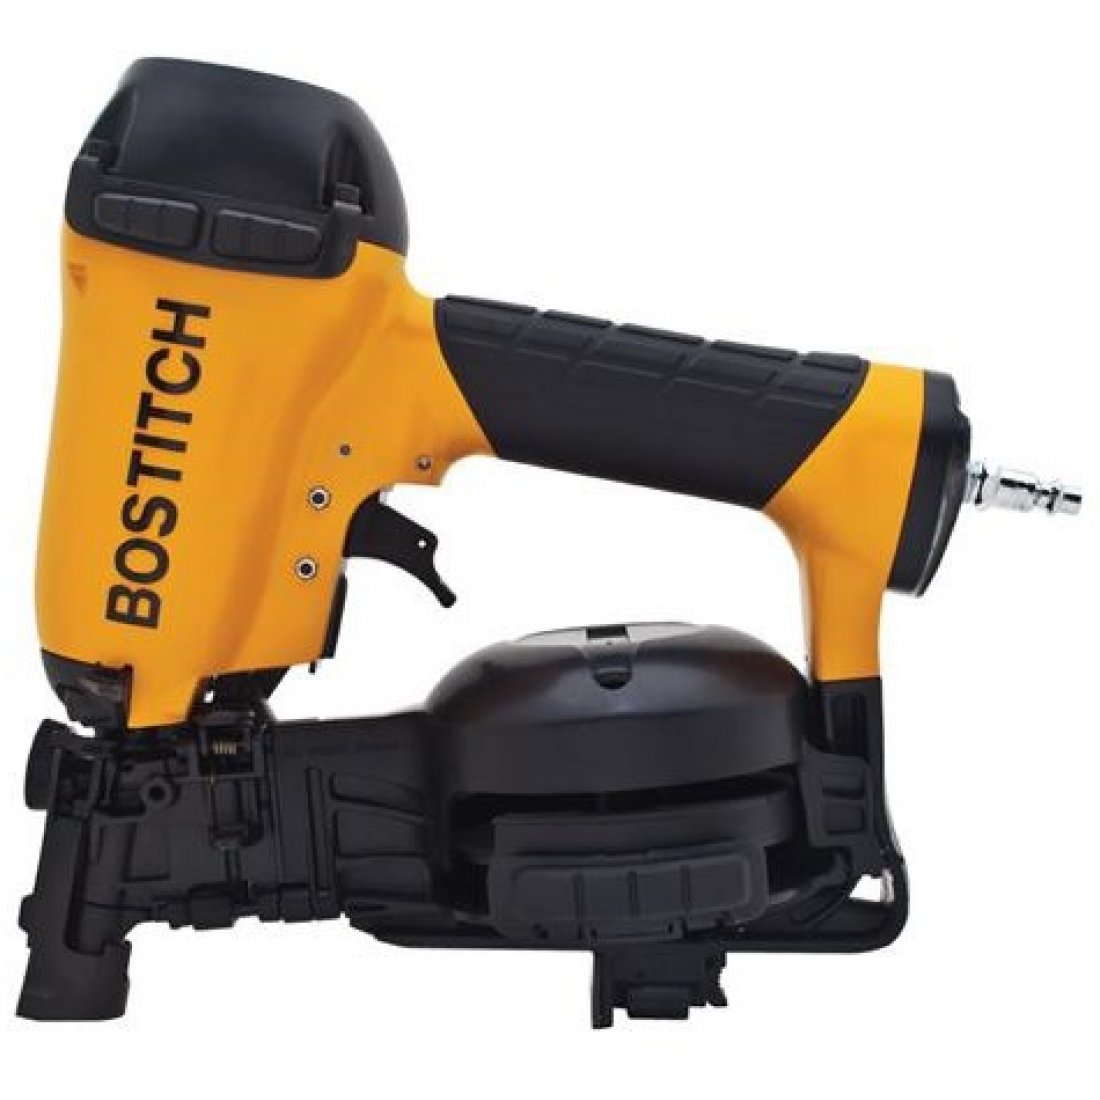 Bostitch Rn461 Coil Roofing Nailer